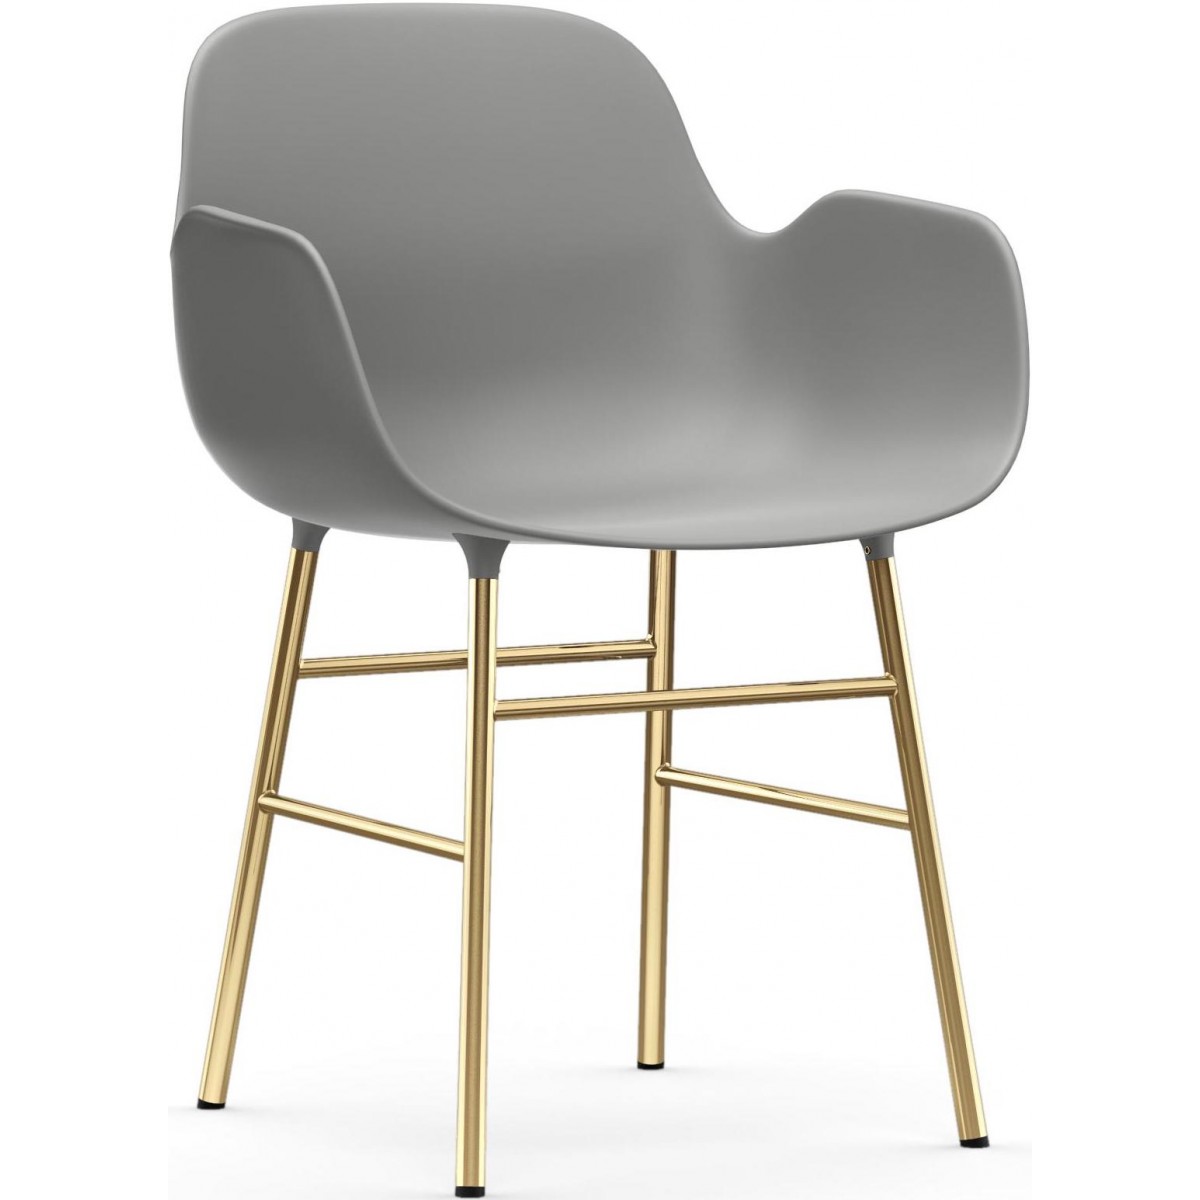 grey / brass – Form Chair with armrests